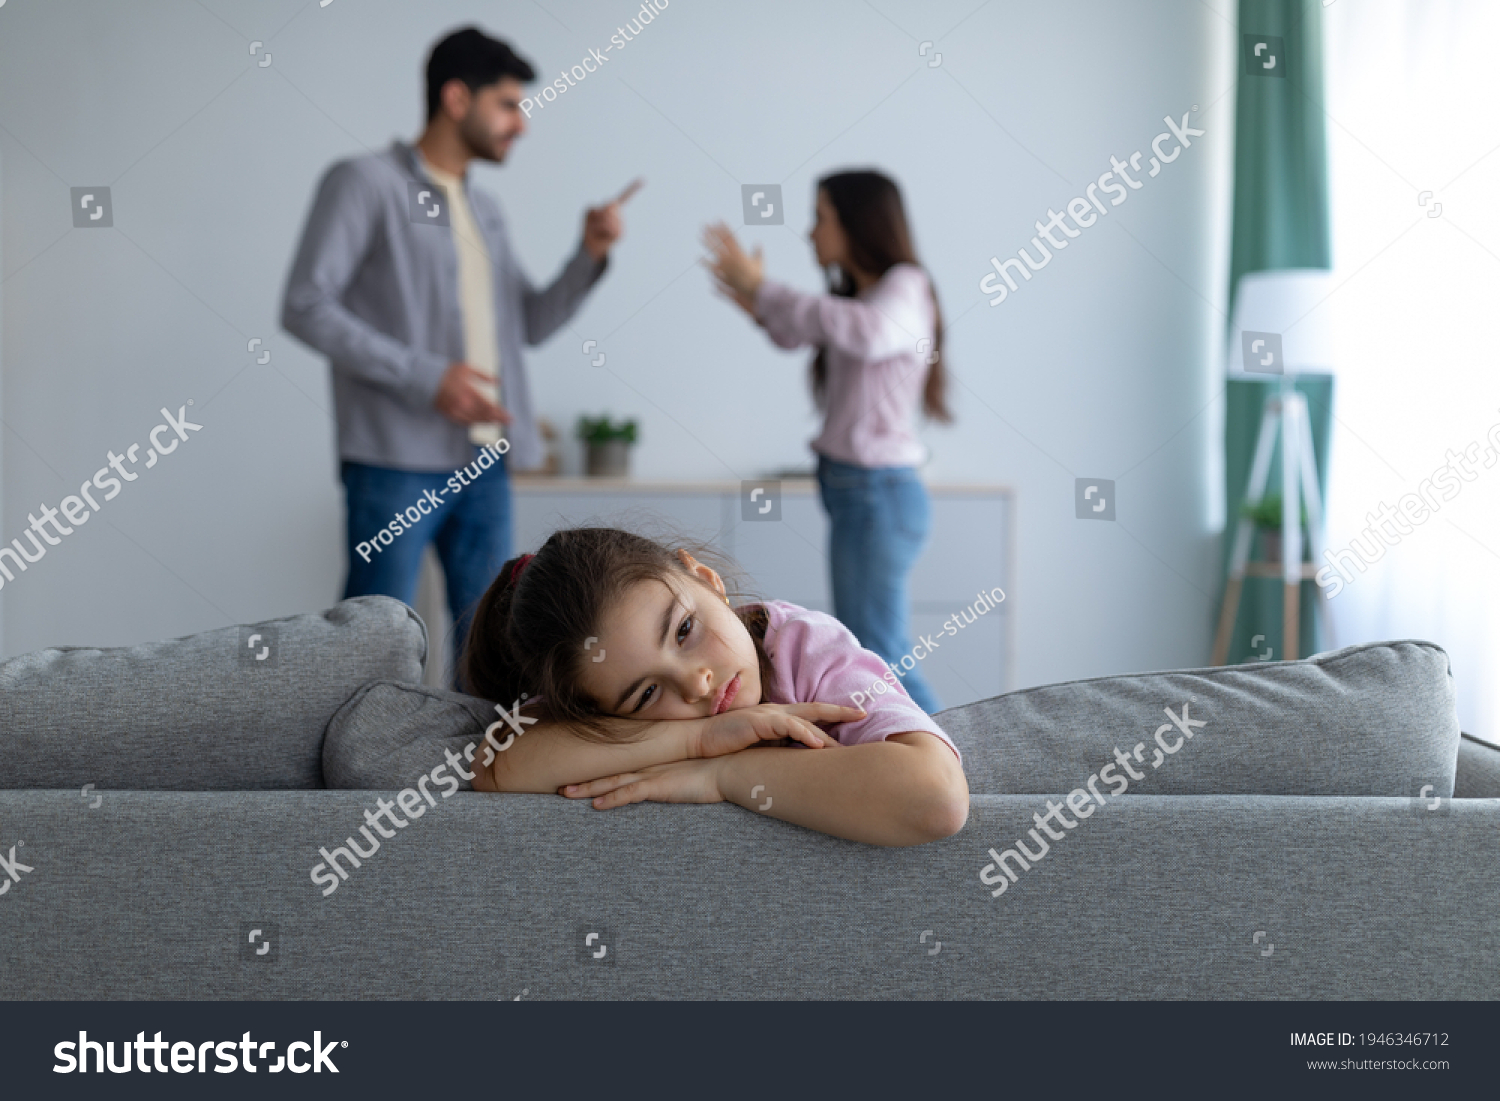 Family conflicts. Sad arab girl sitting alone, feeling lonely and depressed while her parents arguing on the background, selective focus. Family crisis and relationship problems #1946346712